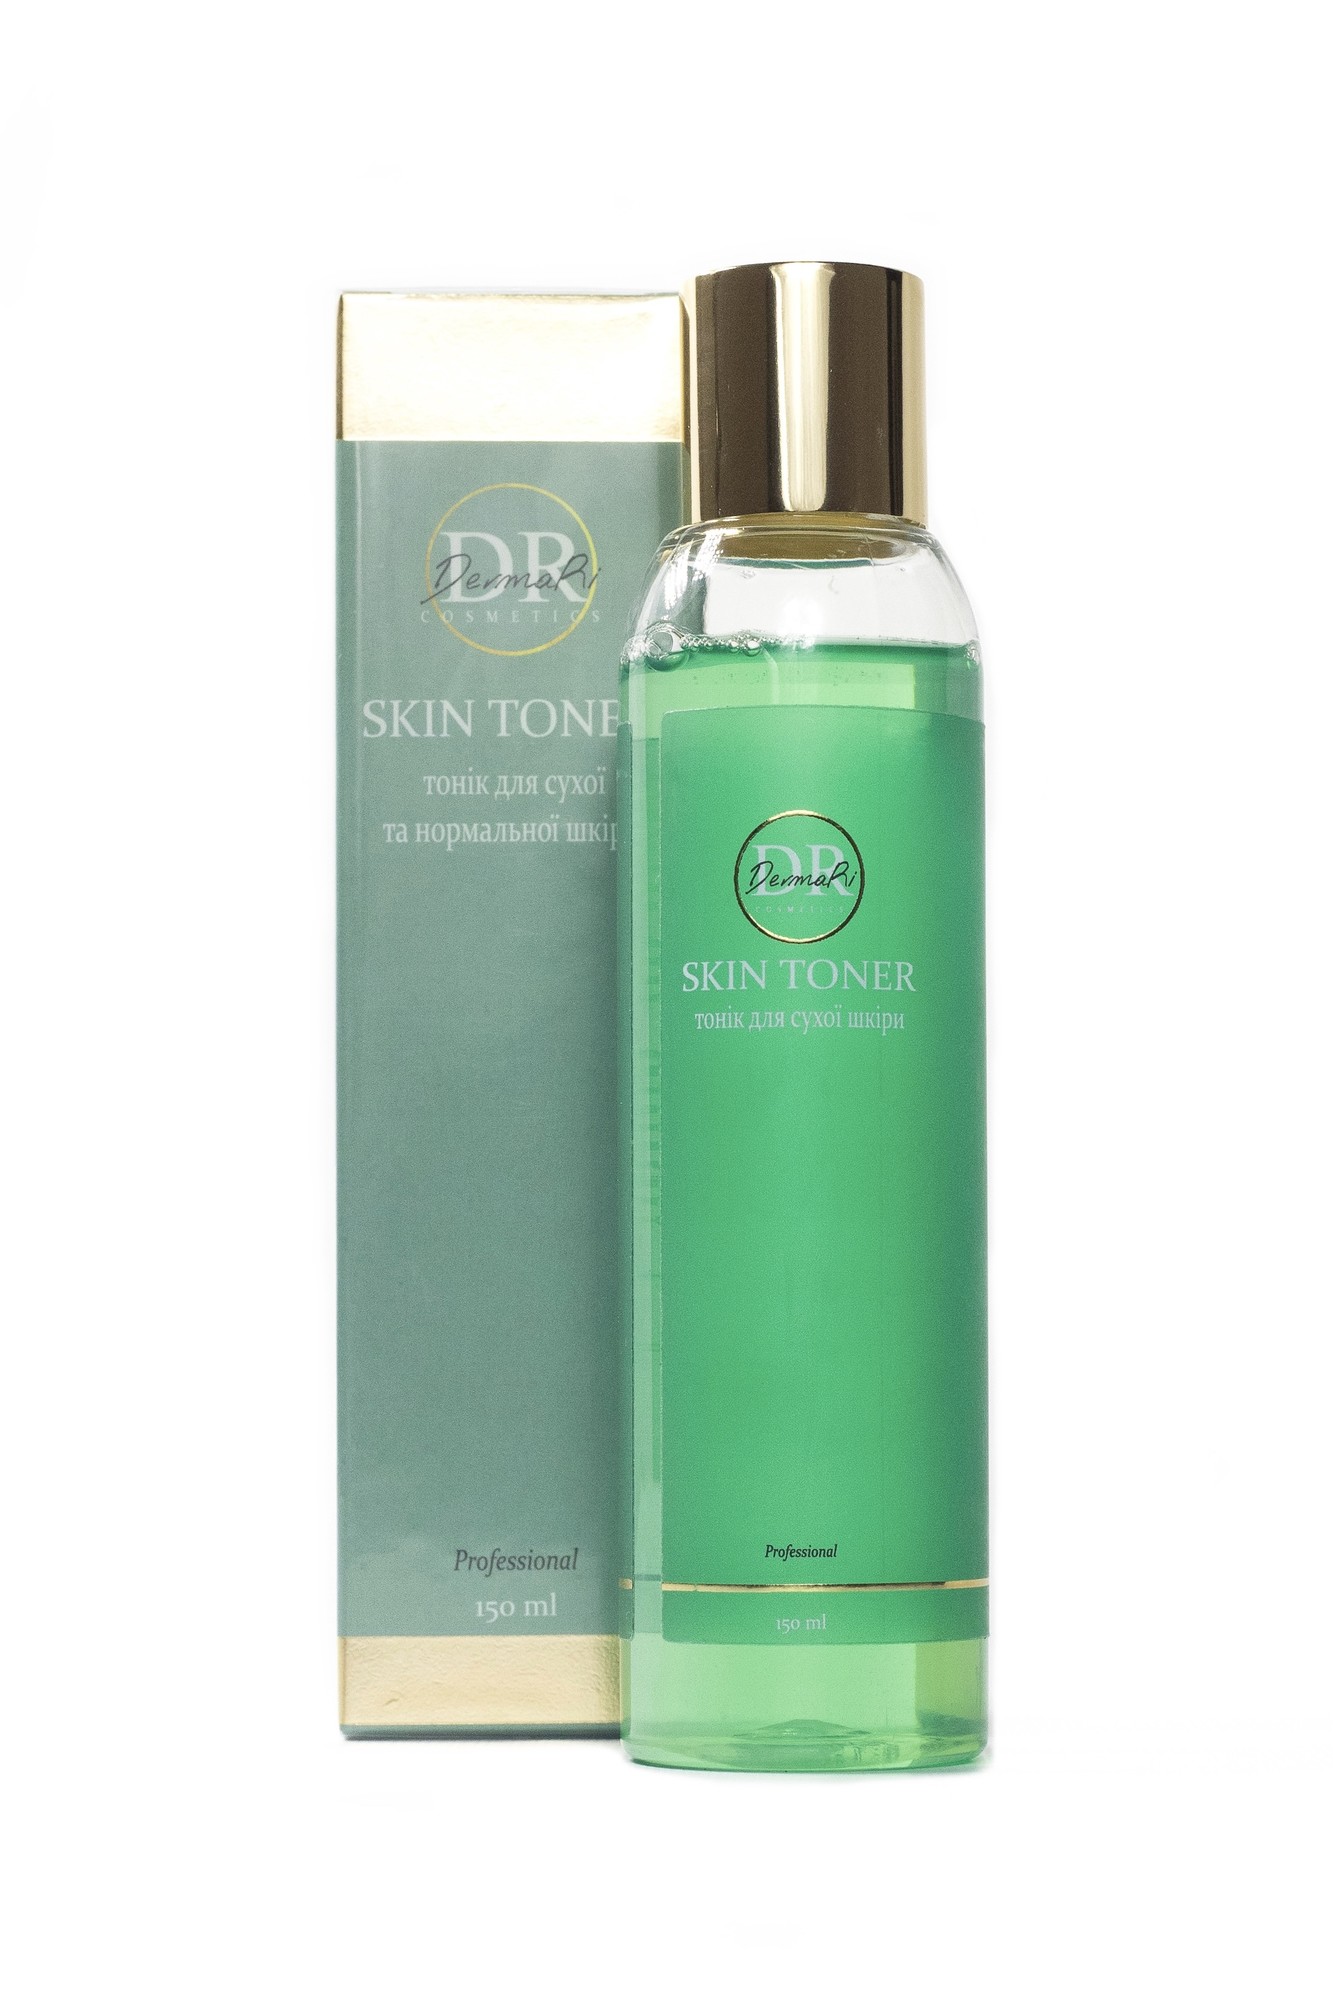 SKIN TONER for dry and normal skin, 150 ml